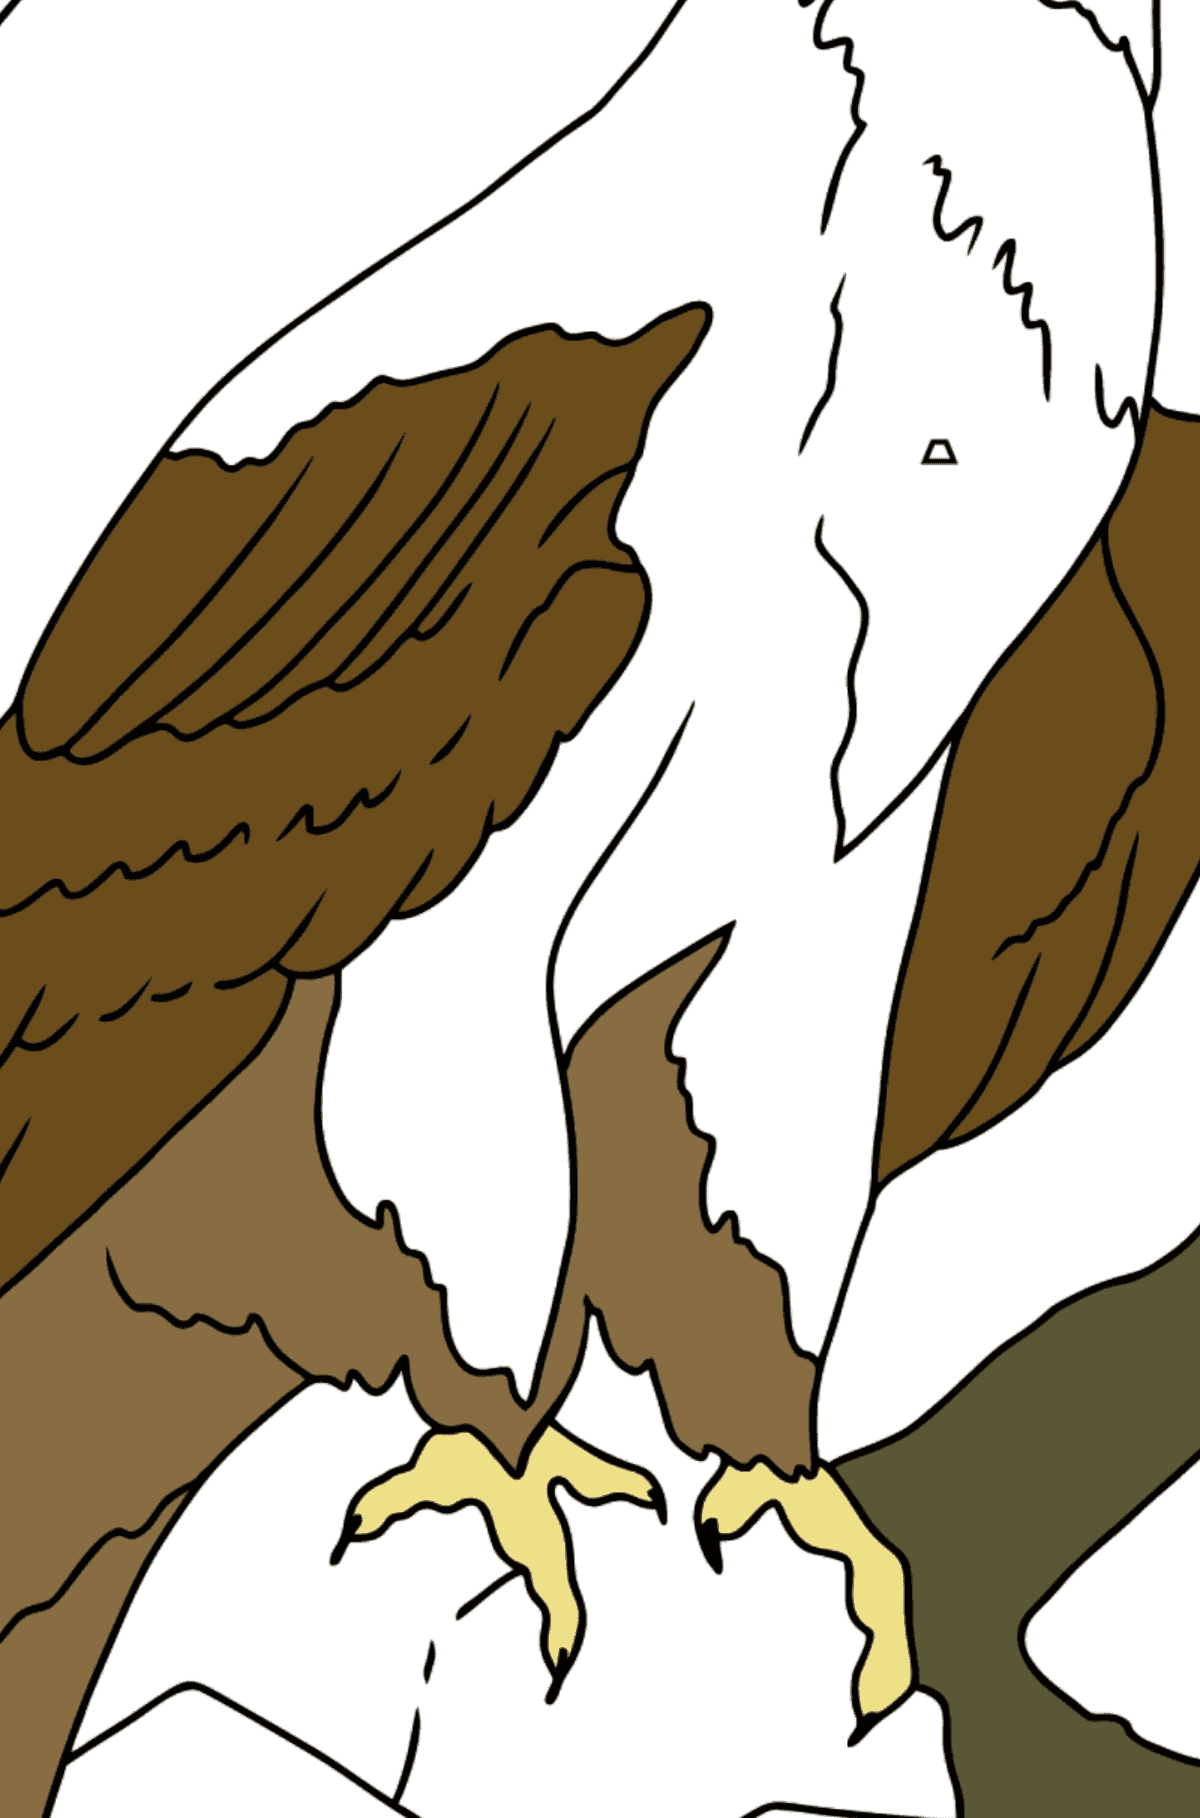 Coloring Page - An Eagle is on the Hunt - Coloring by Geometric Shapes for Kids